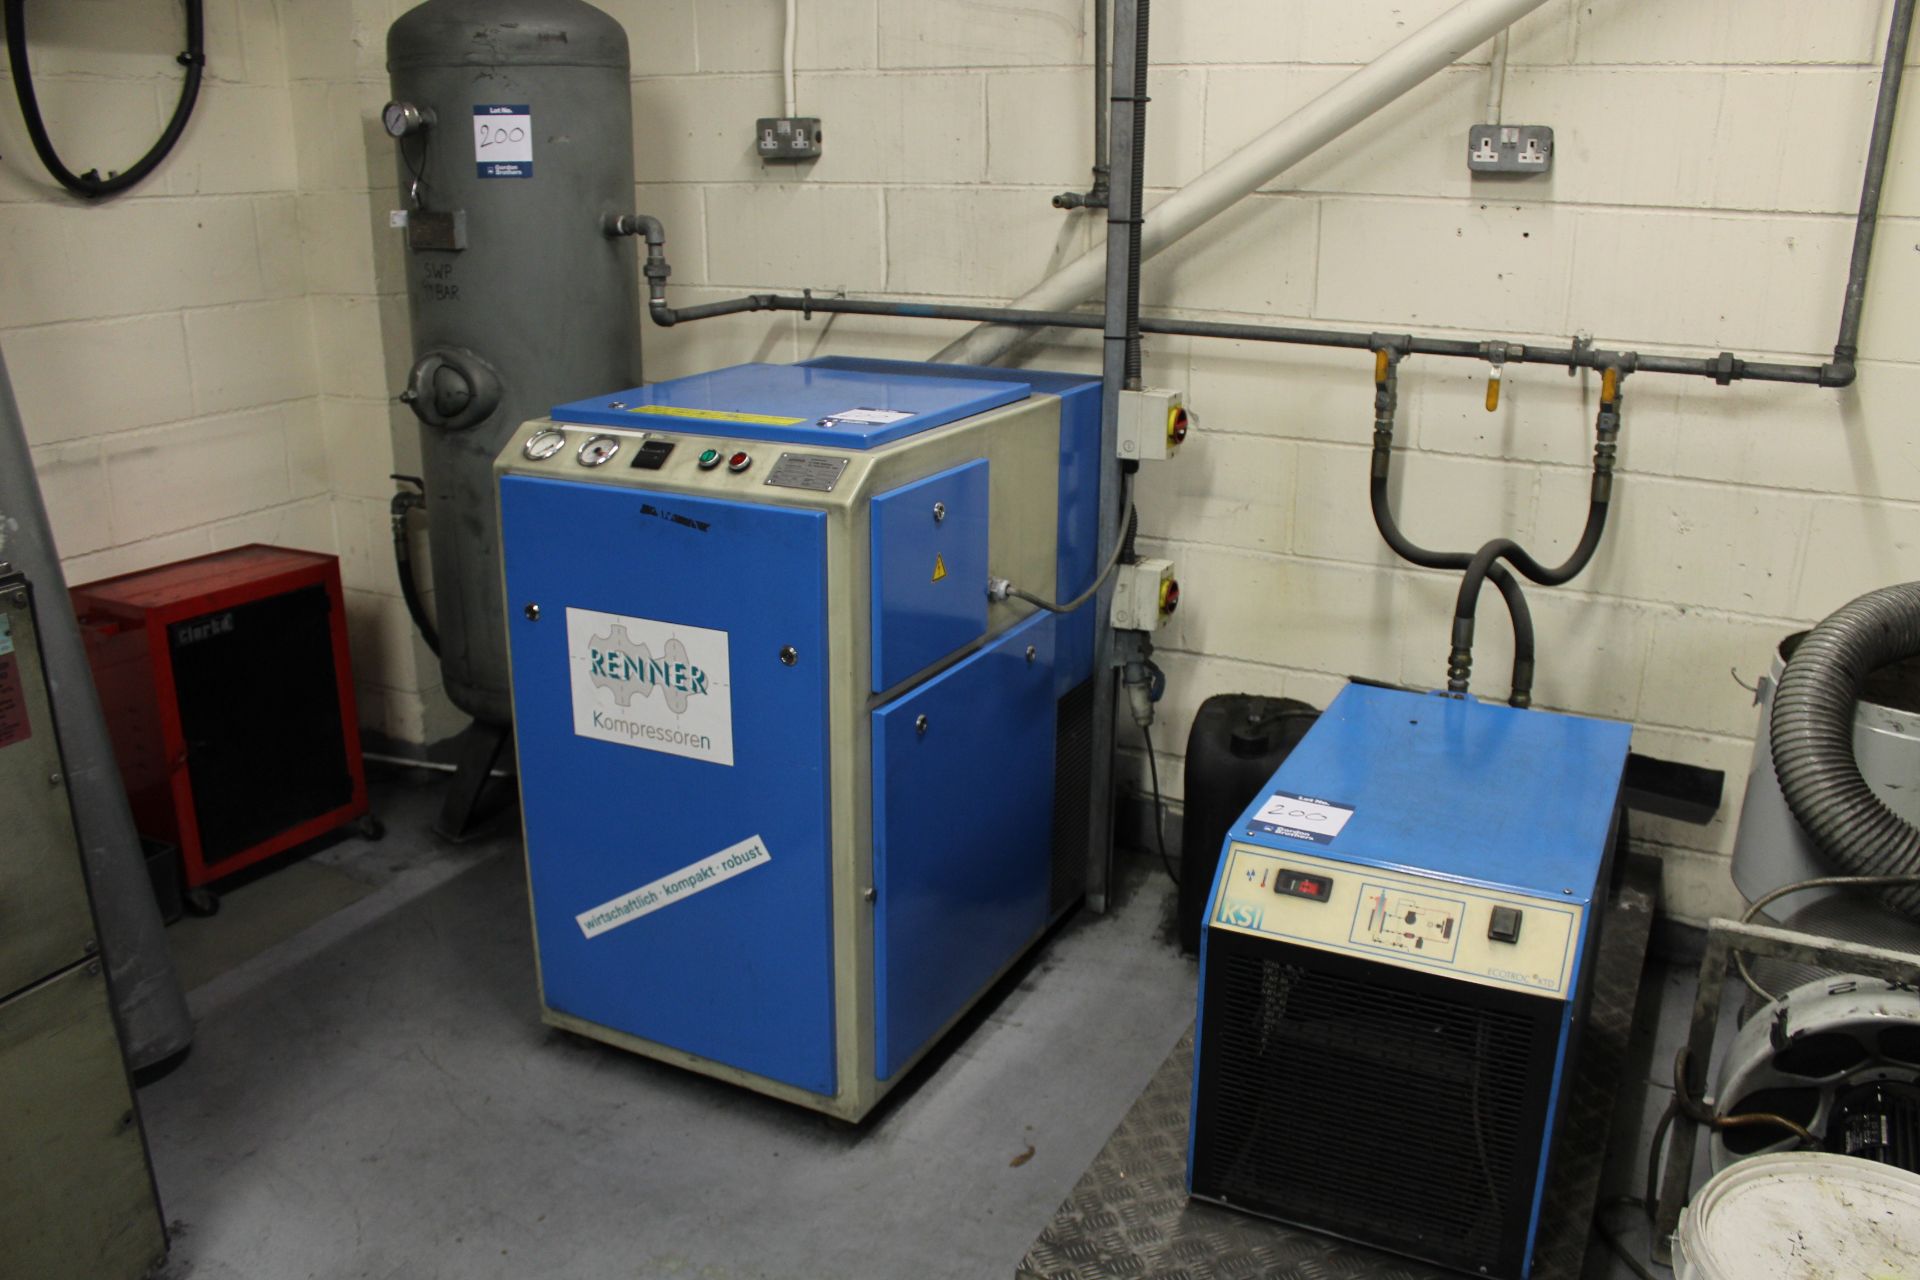 Renner RS11 11 kW / 7.5 Bar packaged rotary screw air compressor, Serial No. 3877 (2001), hours: